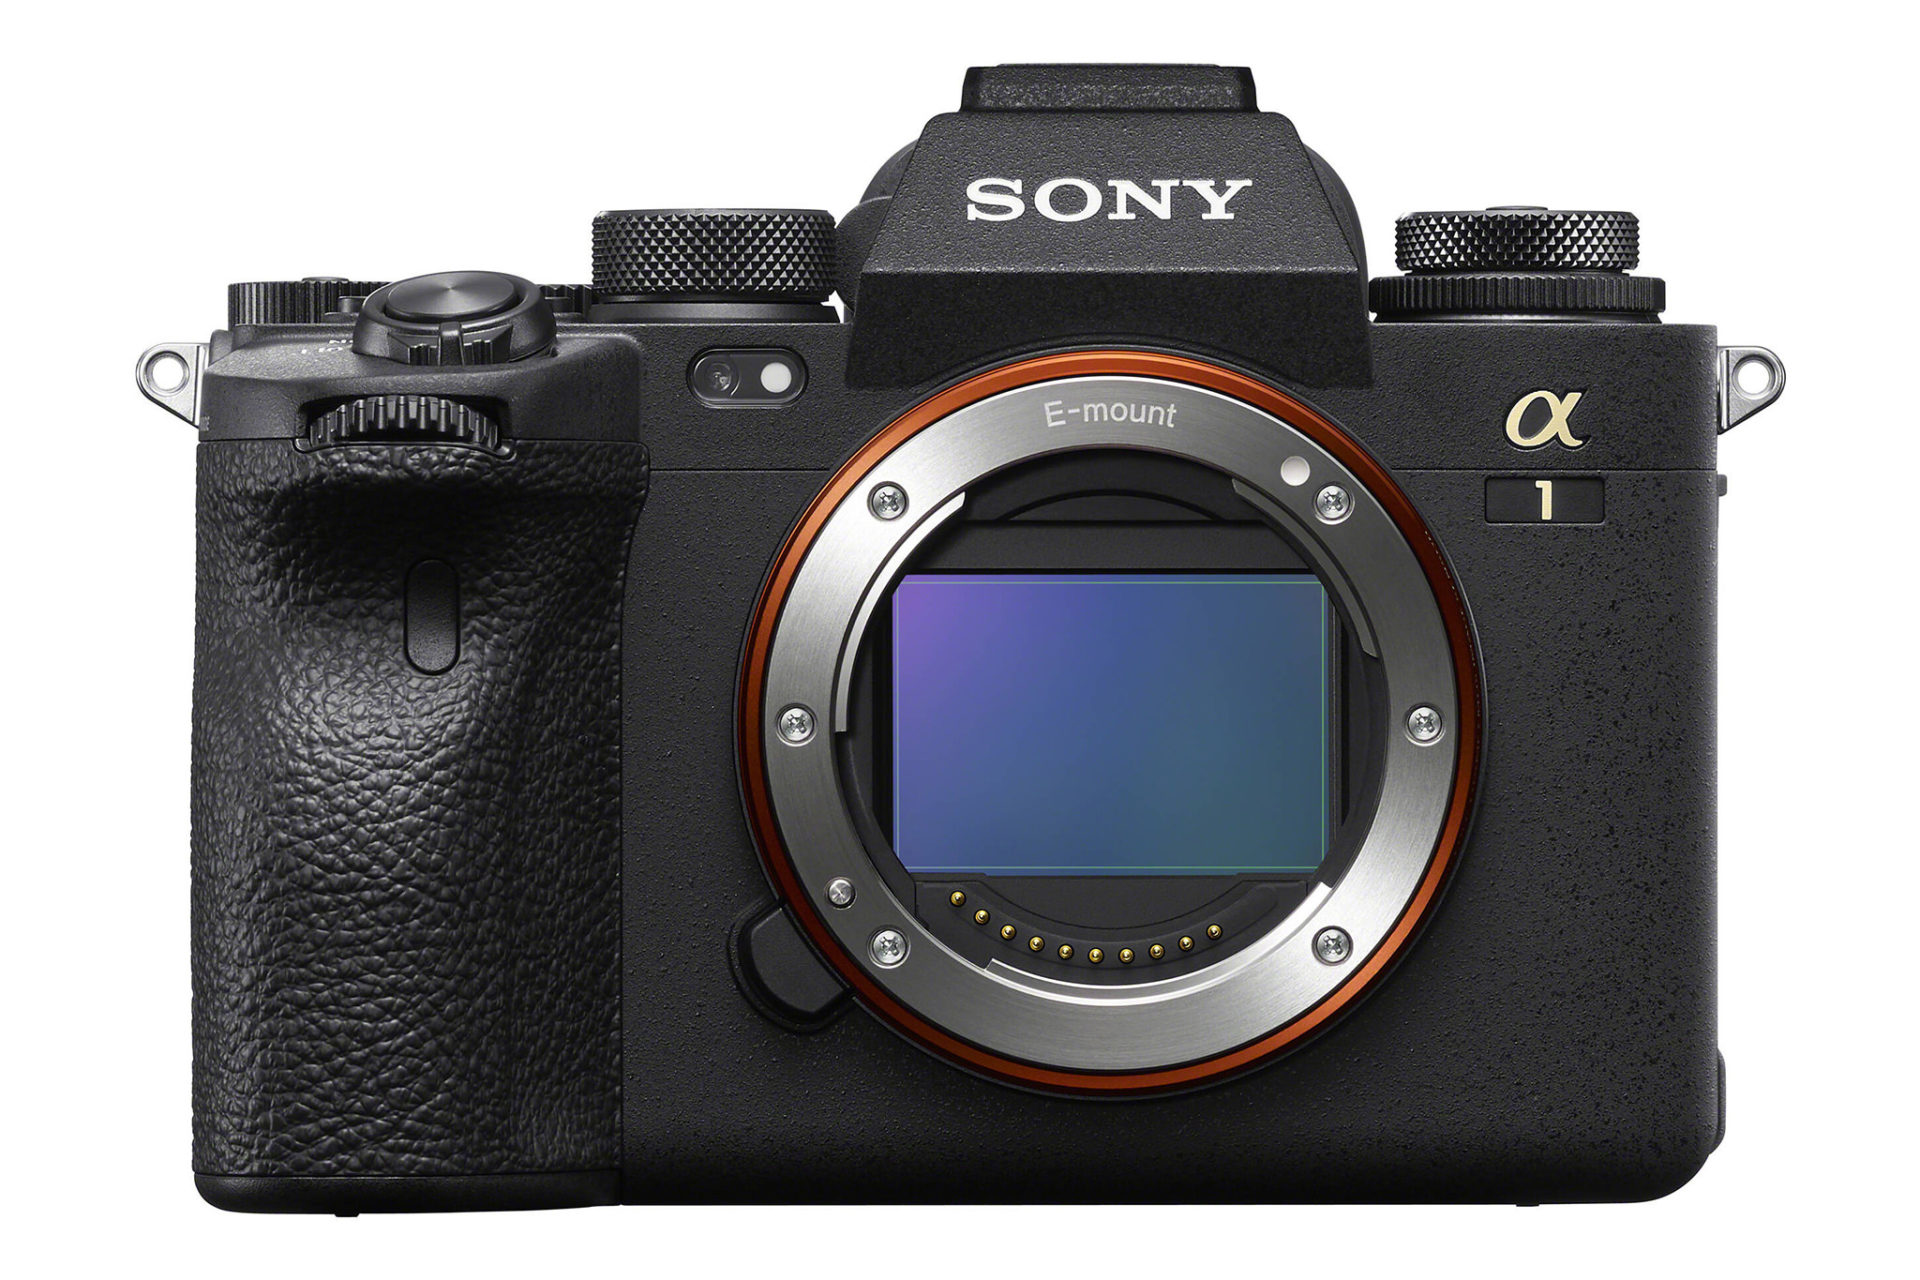 Sony Alpha 1 camera is now official and is the most powerful mirrorless